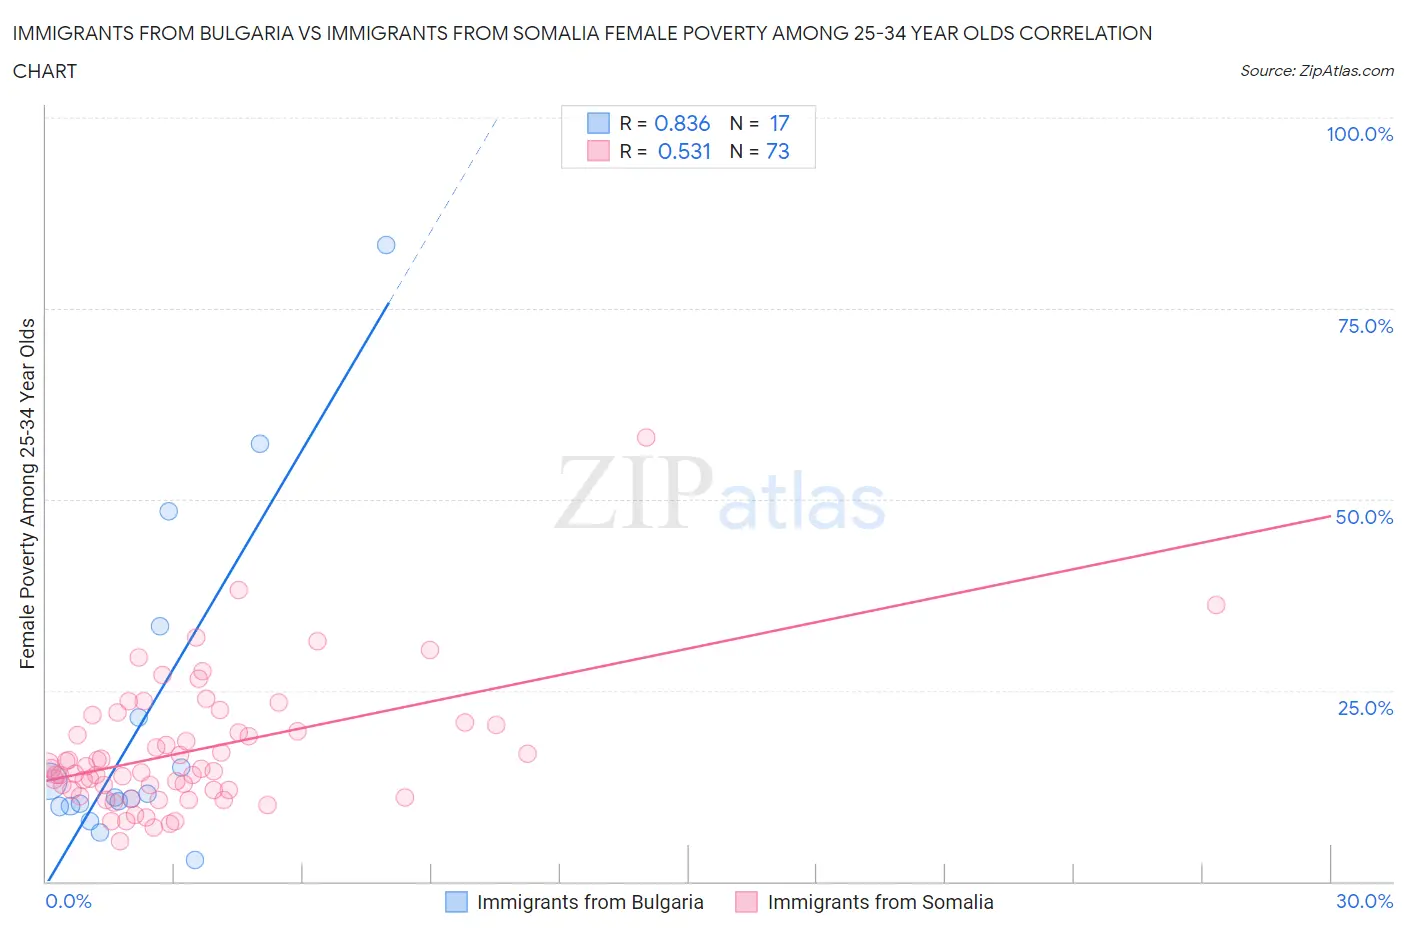 Immigrants from Bulgaria vs Immigrants from Somalia Female Poverty Among 25-34 Year Olds